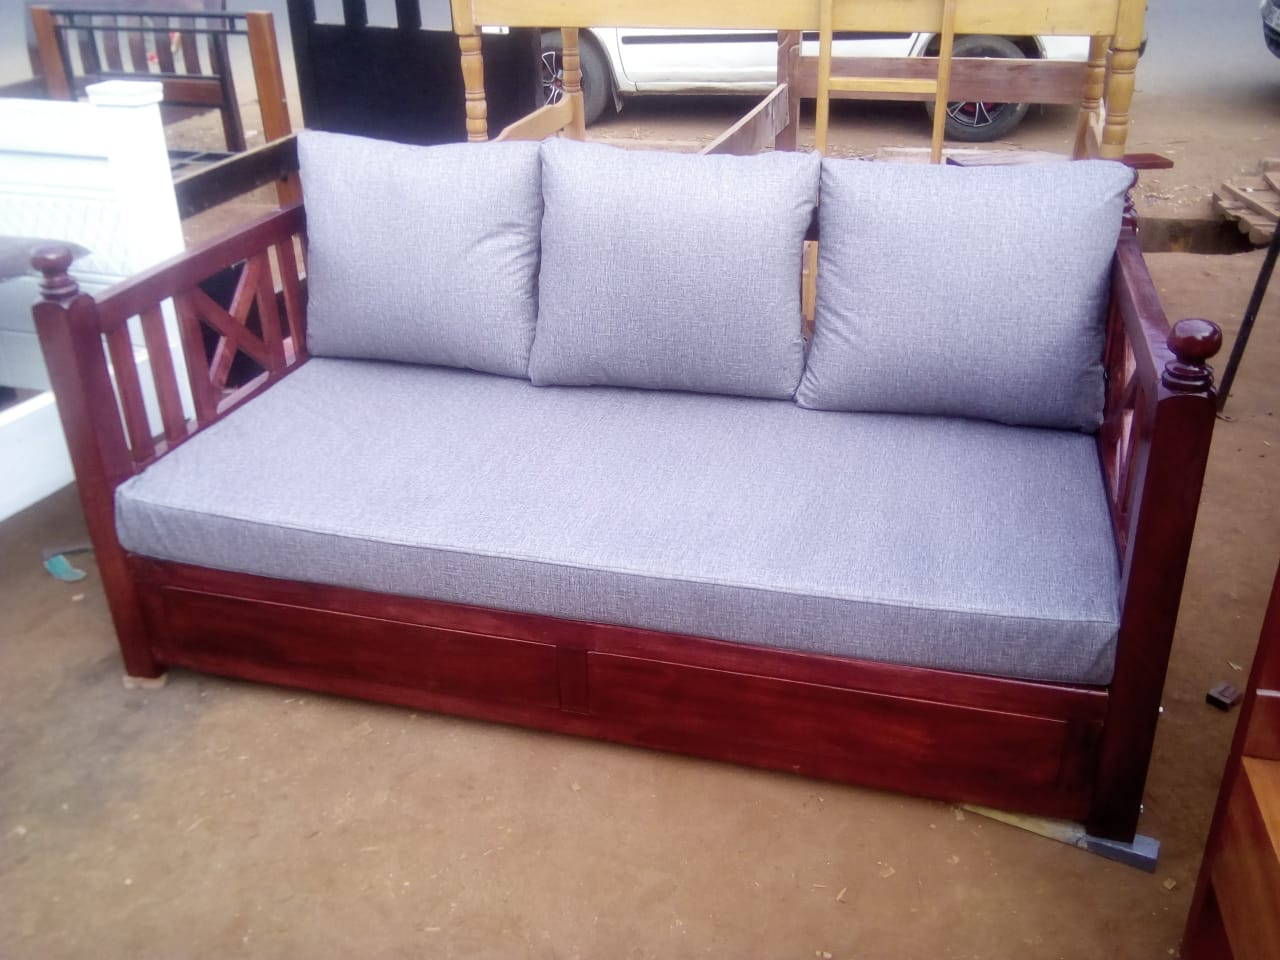 Day bed